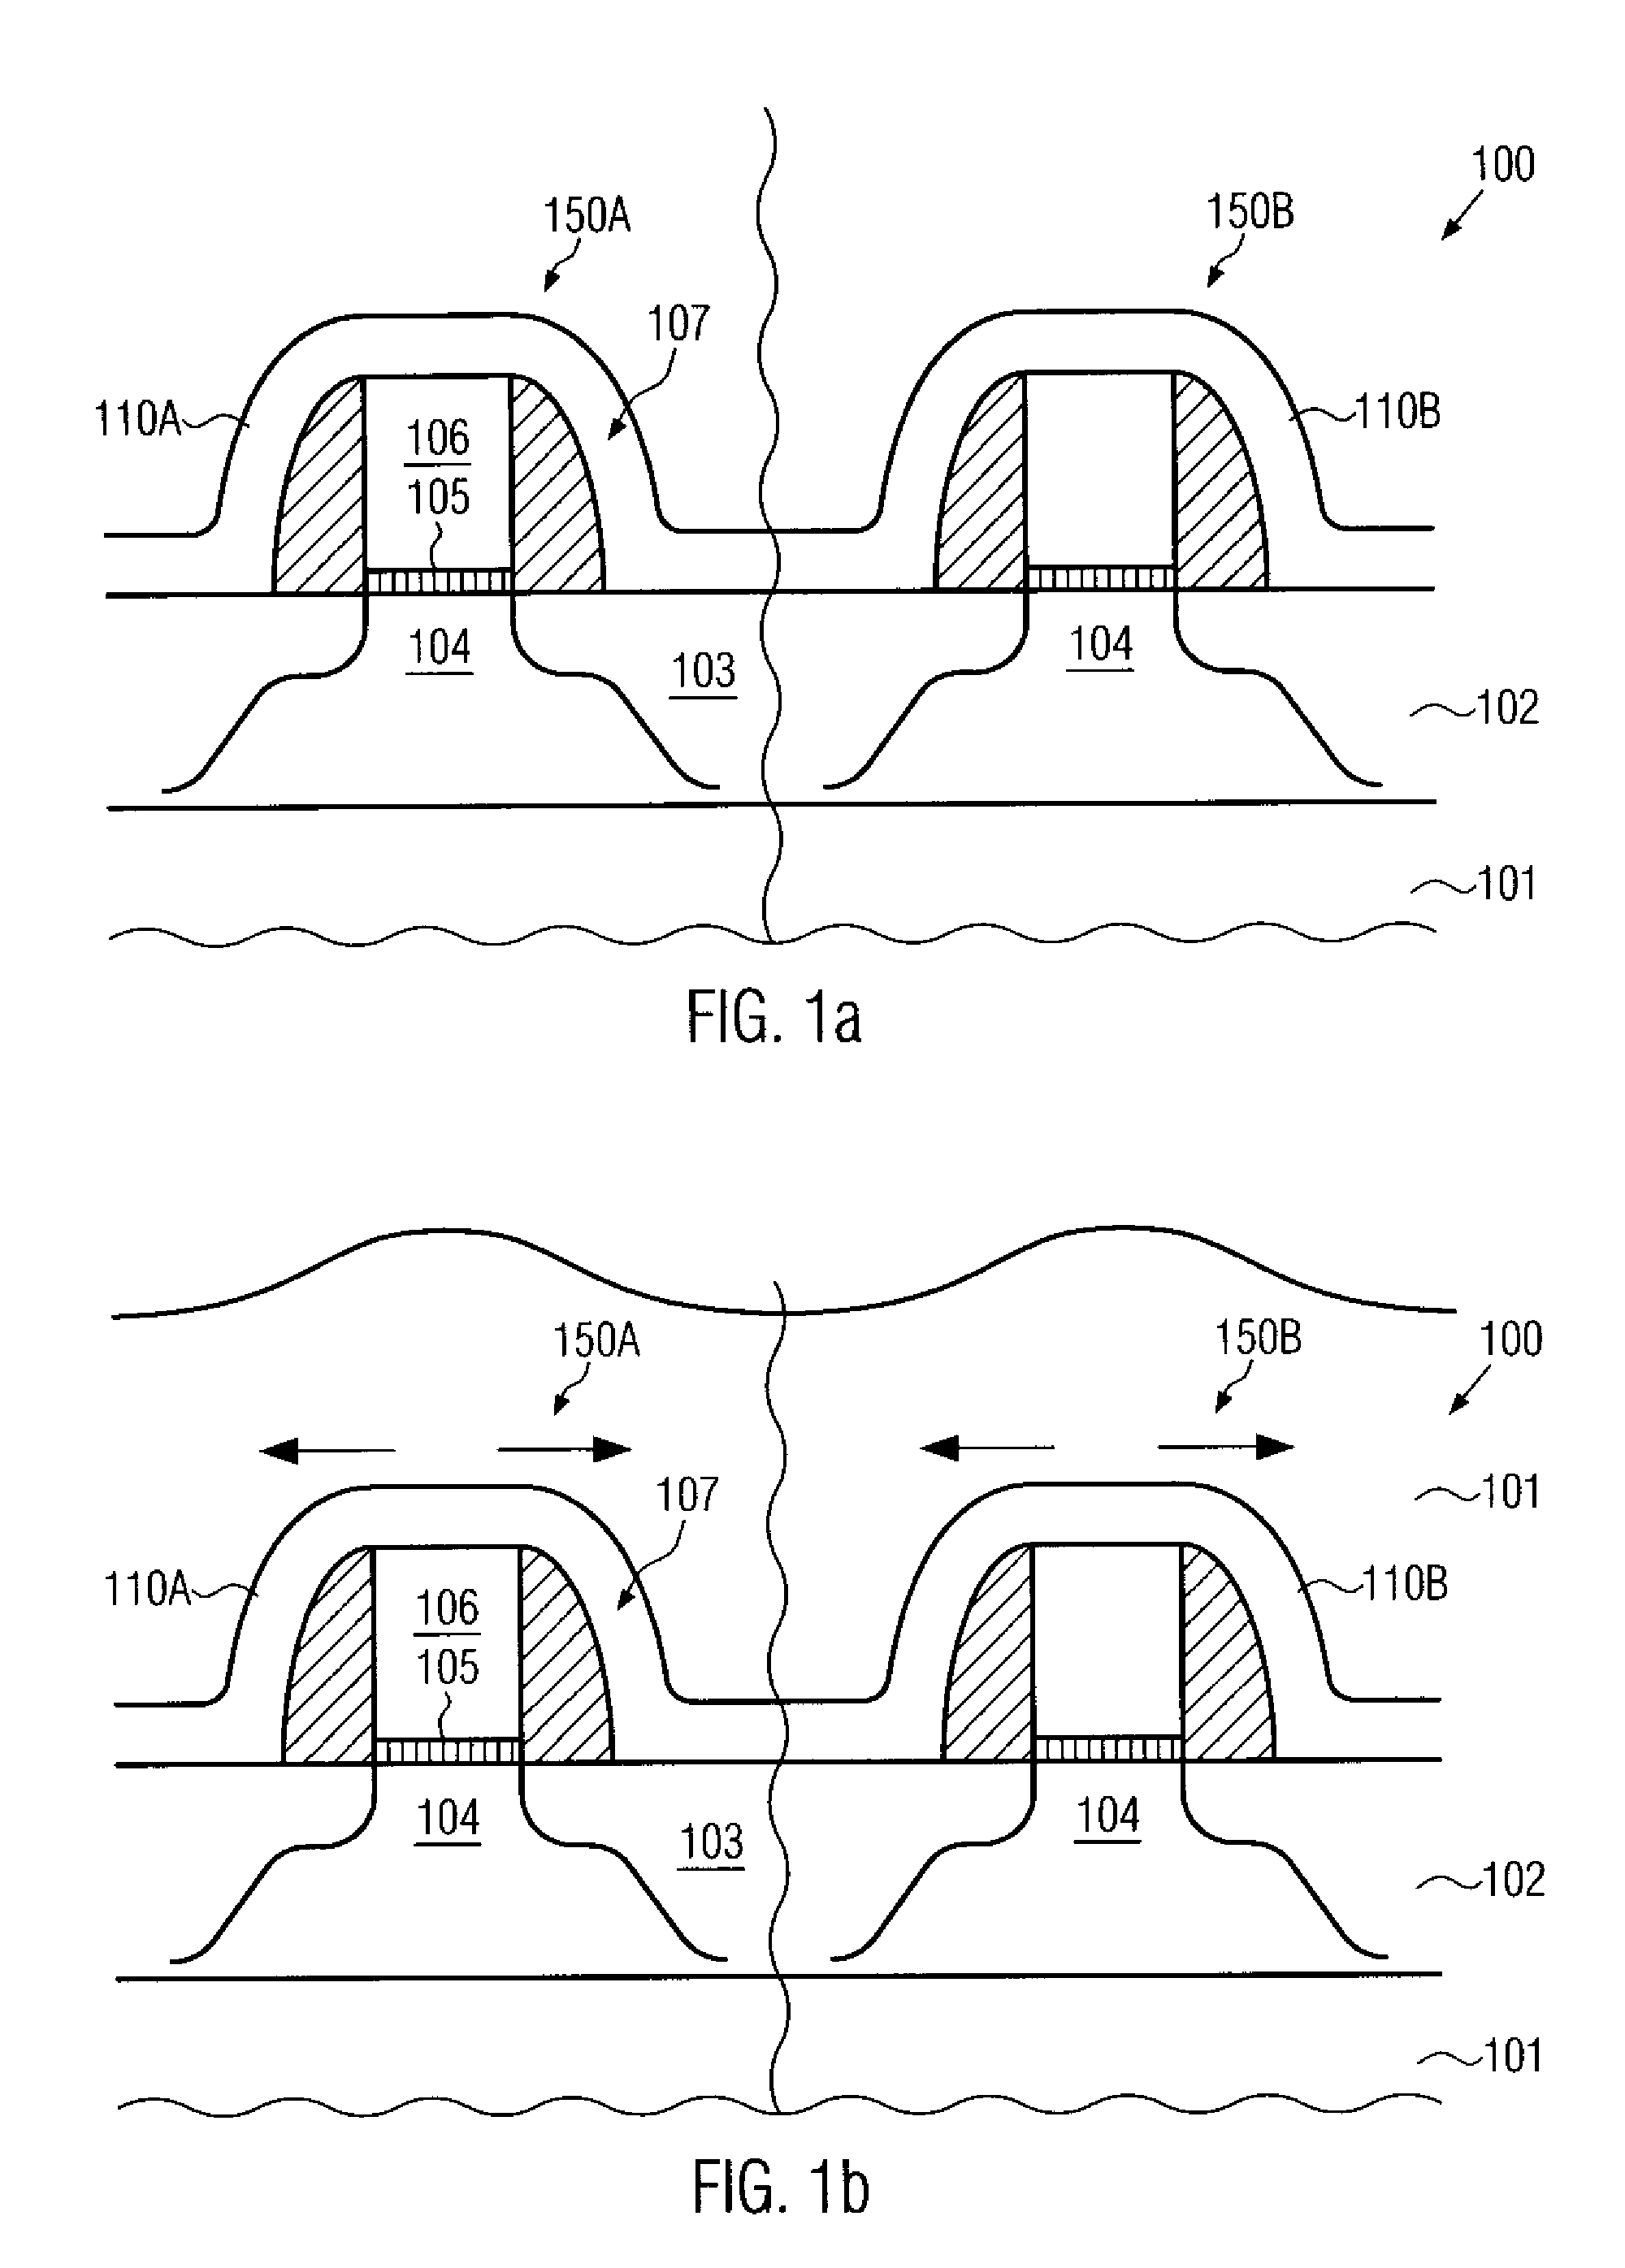 Field effect transistor having an interlayer dielectric material having increased intrinsic stress